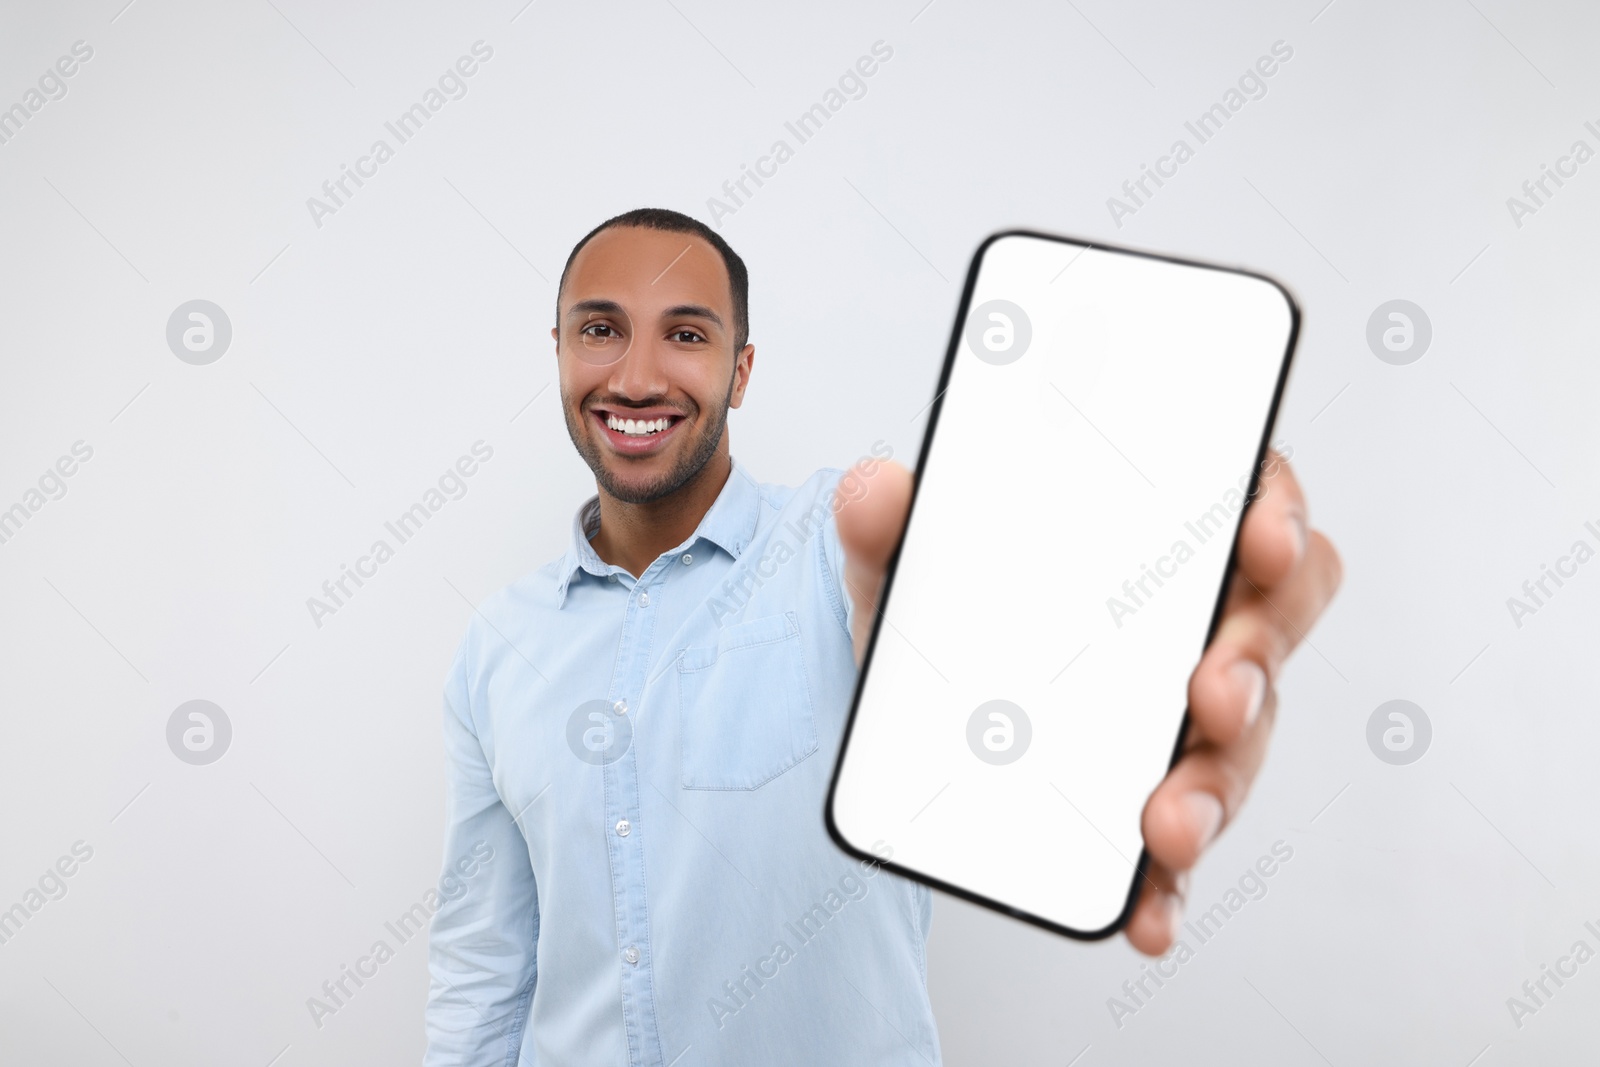 Photo of Young man showing smartphone in hand on white background